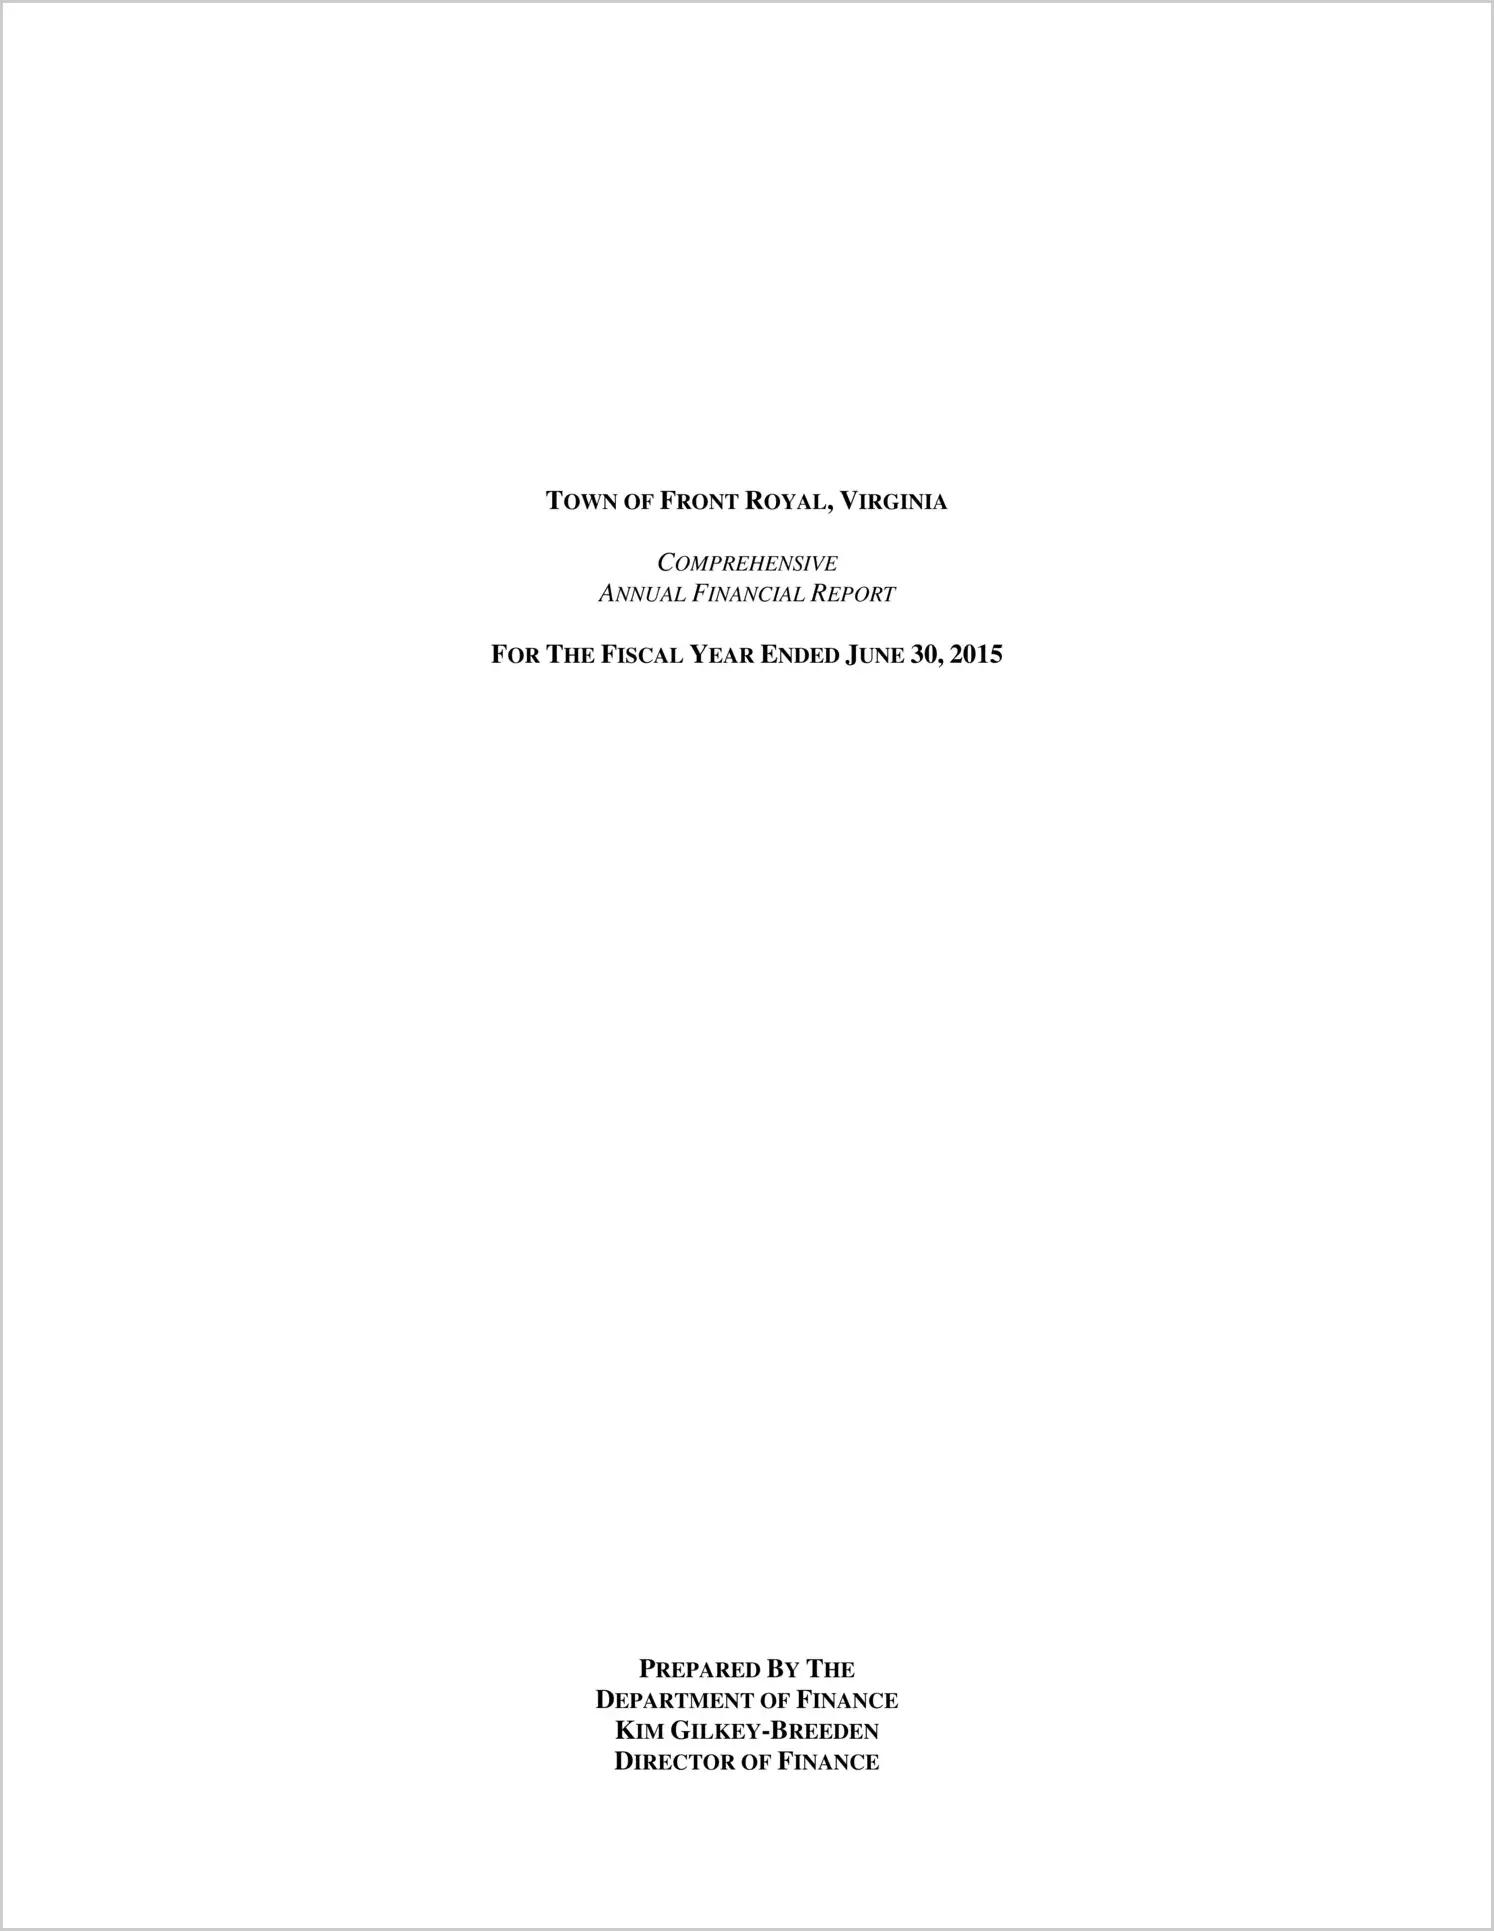 2015 Annual Financial Report for Town of Front Royal